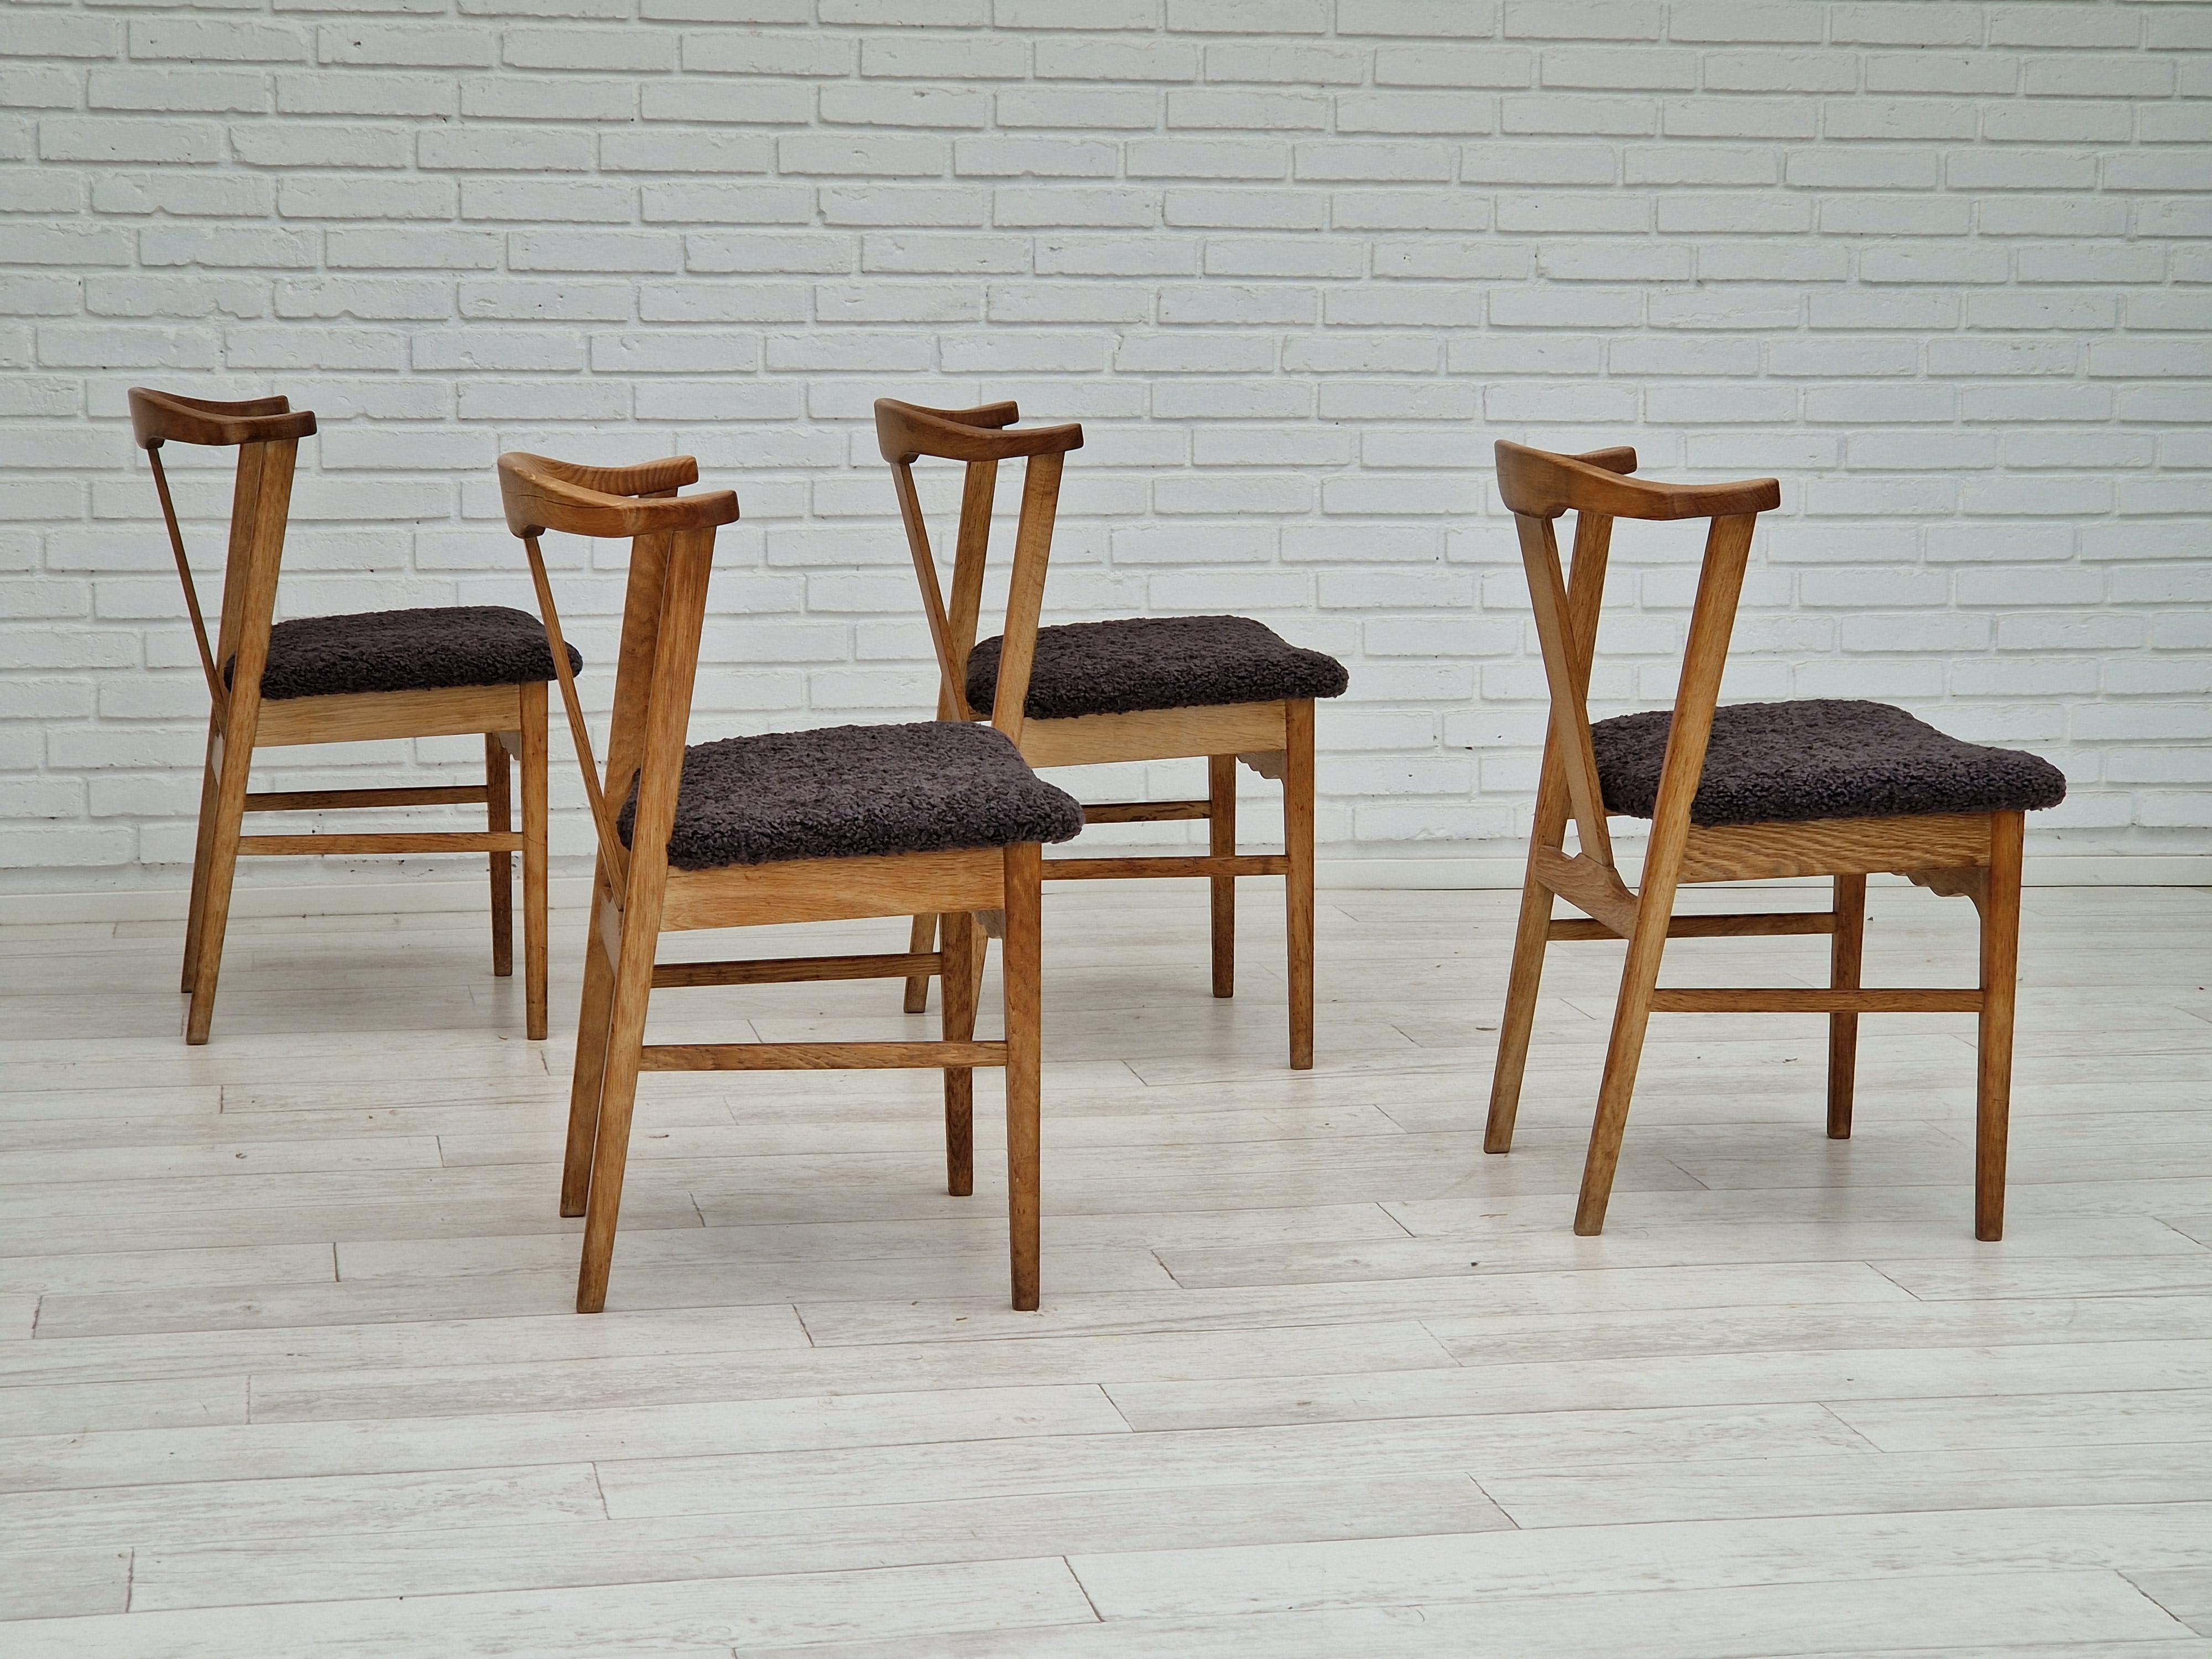 Fabric 1960s, Danish Design, Set of 4 Dinning Chairs, Oak Wood, Reupholstered For Sale